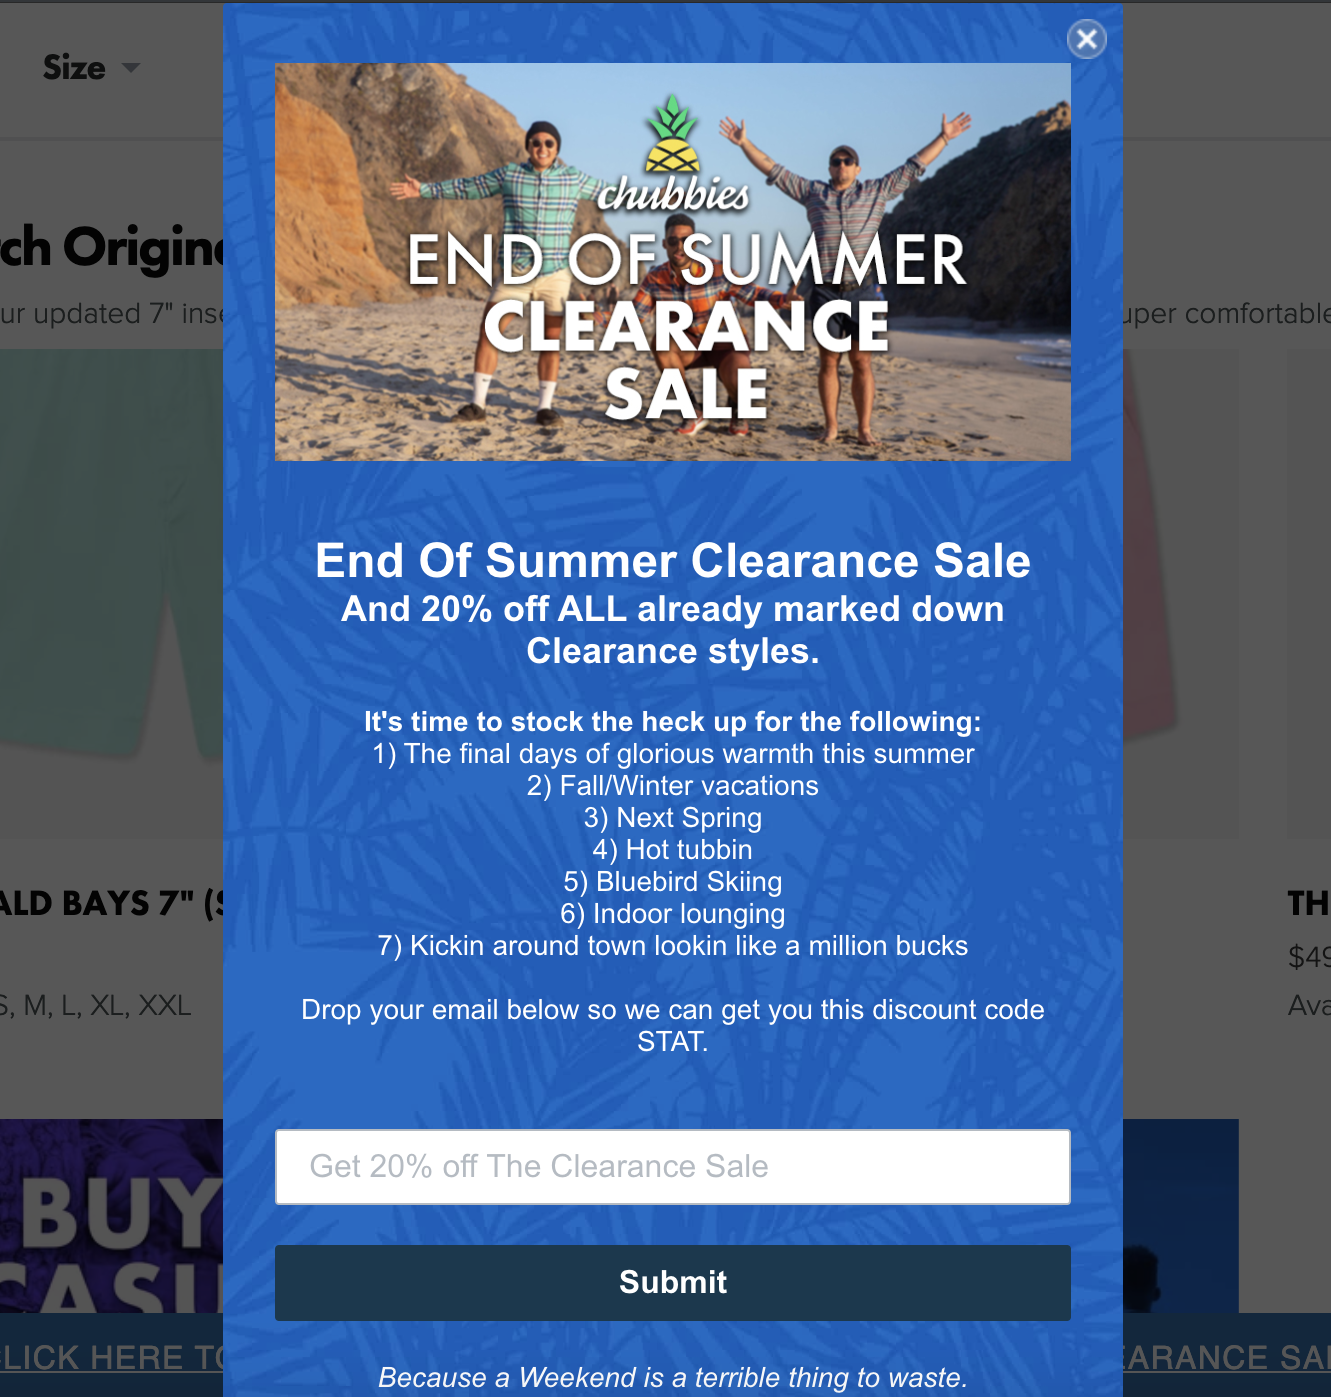 email-opt-in-idea-chubbies